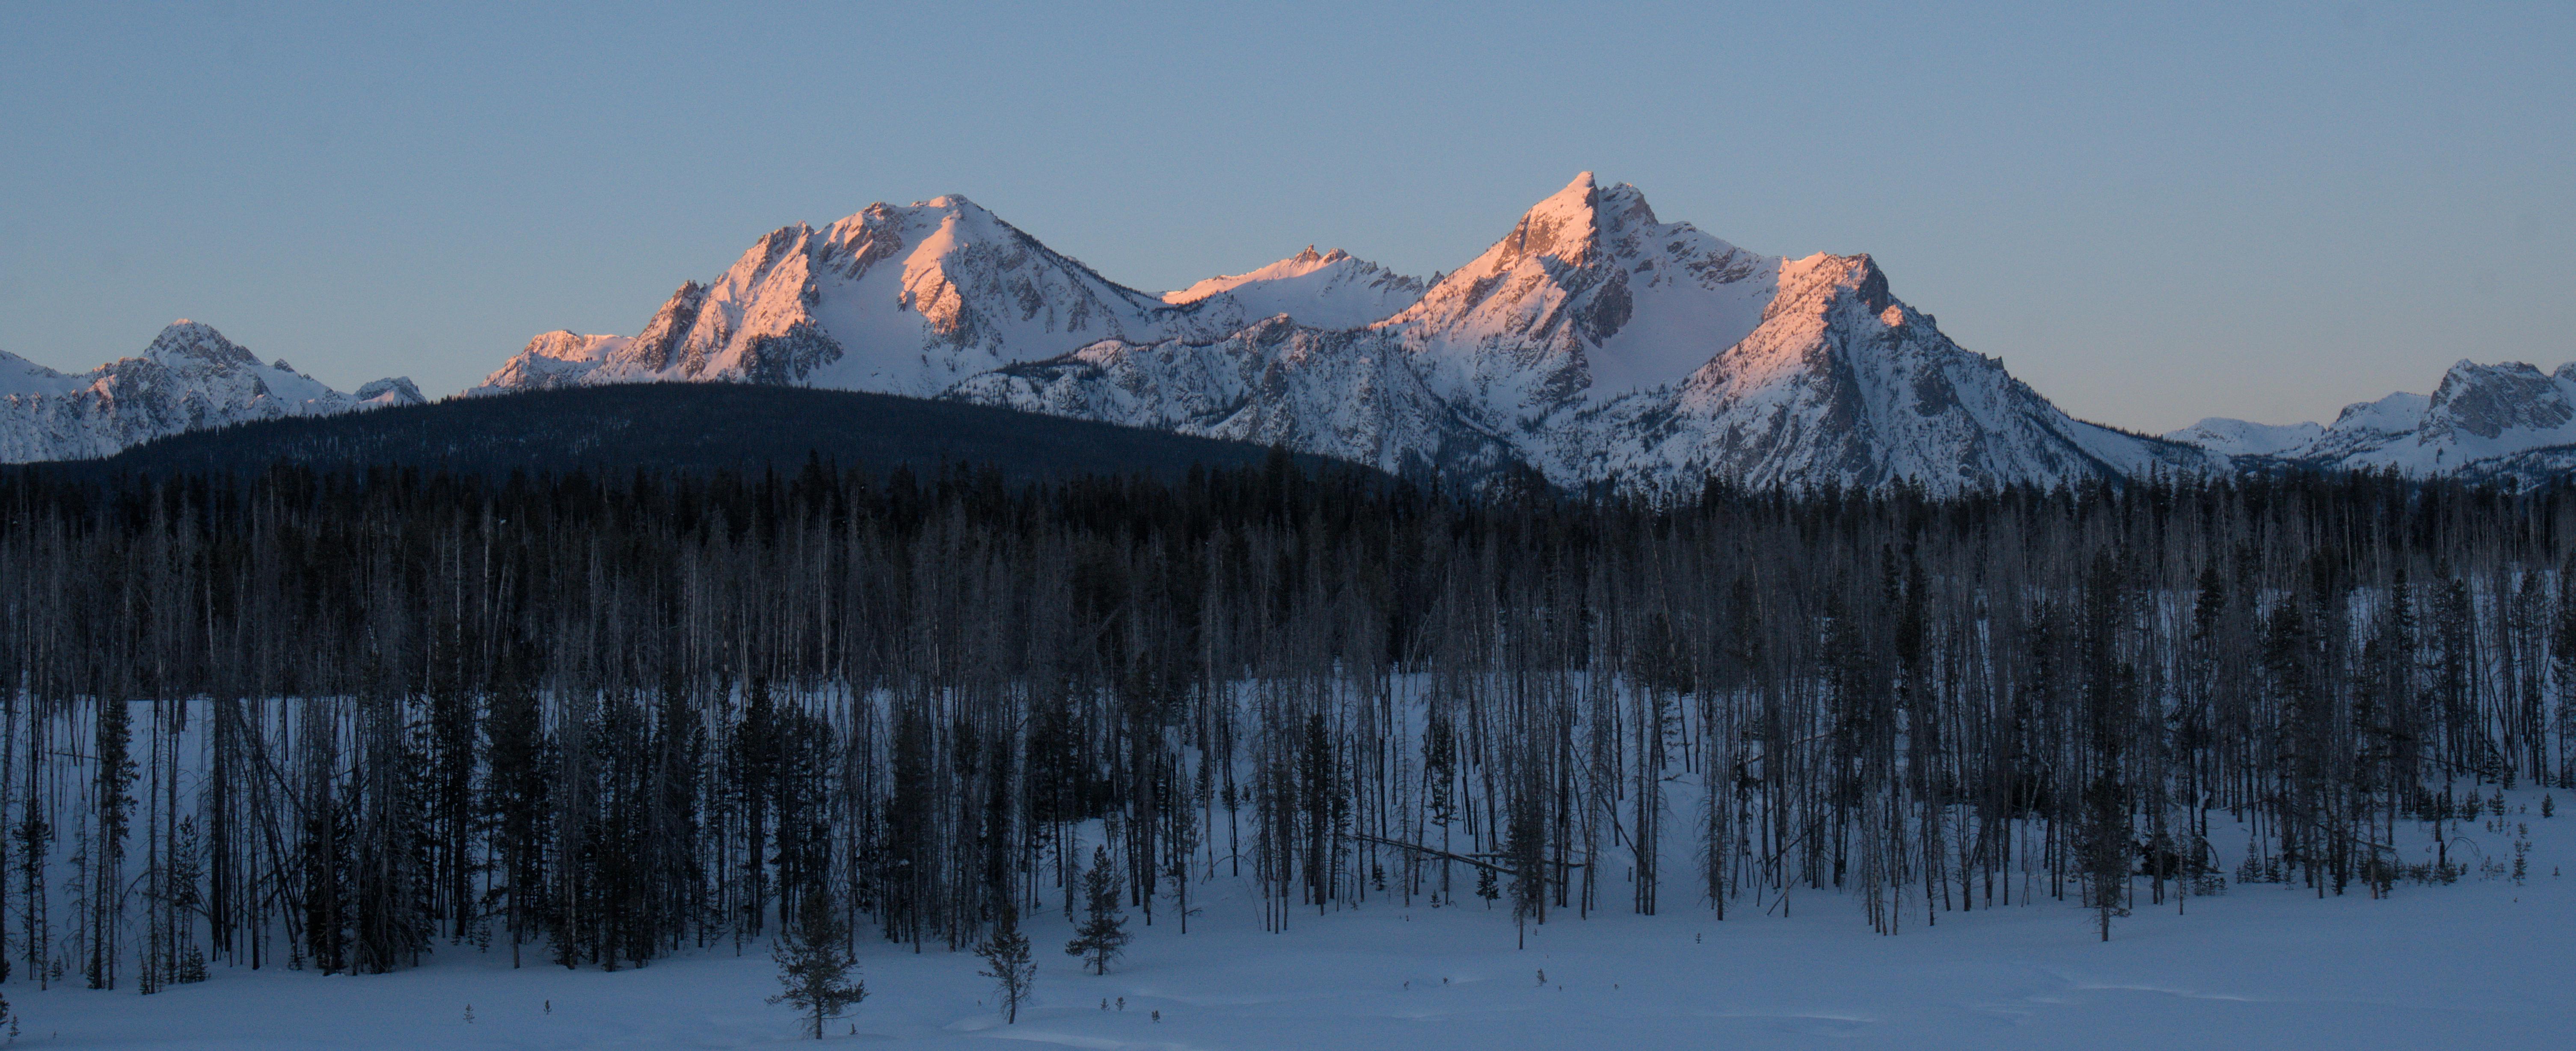 General 6020x2457 snow winter mountains landscape nature sunset Idaho USA North America forest pine trees